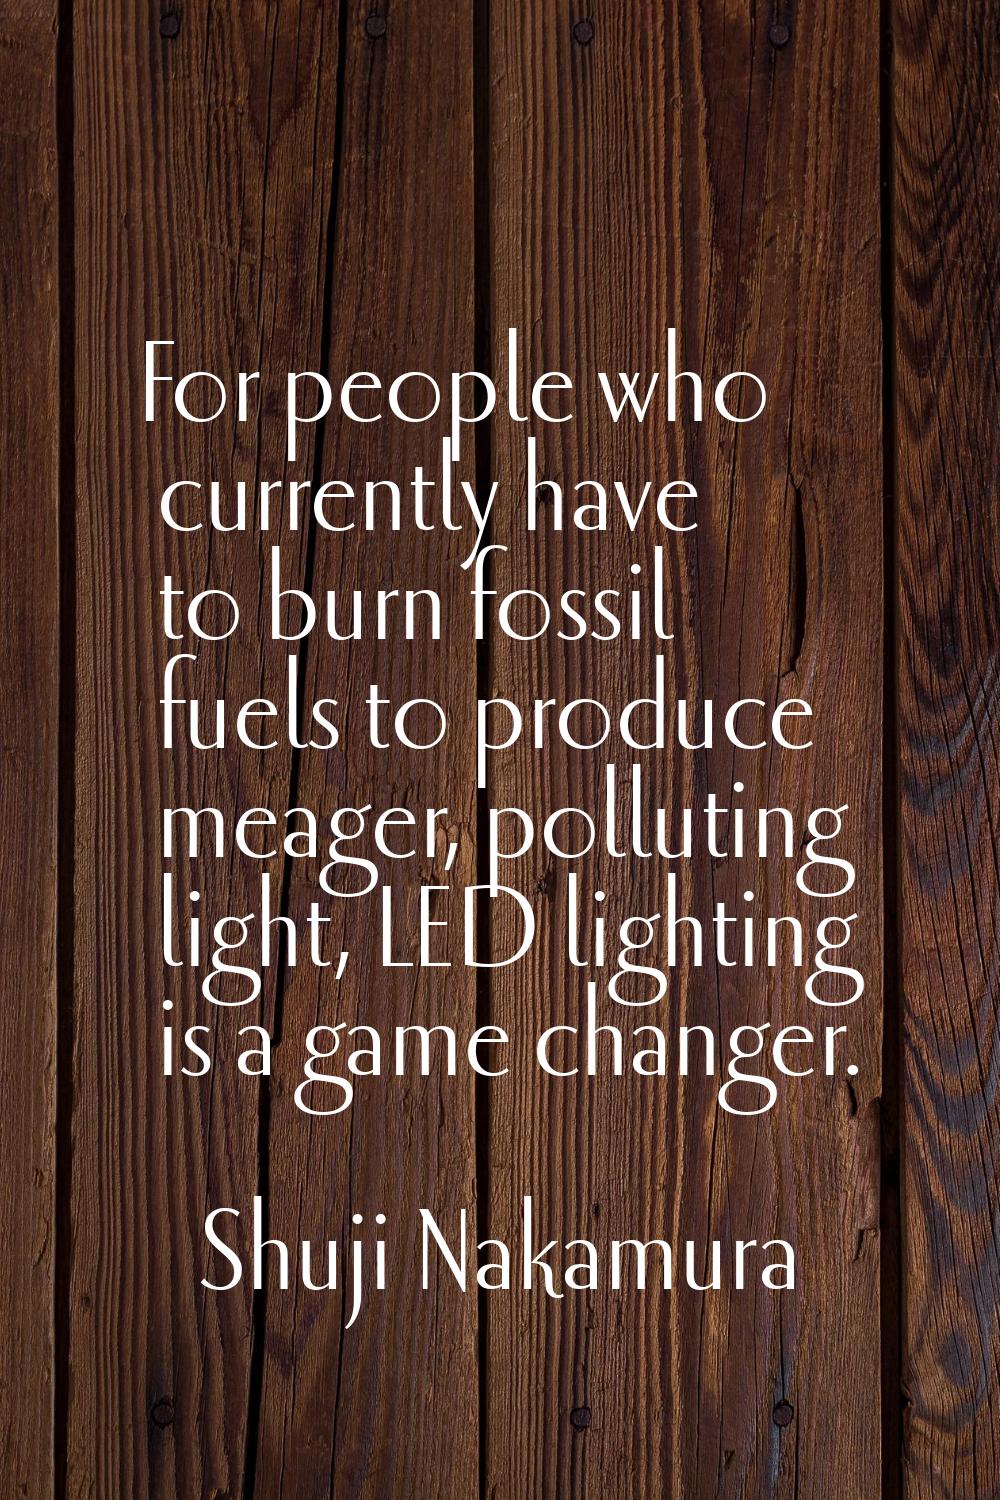 For people who currently have to burn fossil fuels to produce meager, polluting light, LED lighting